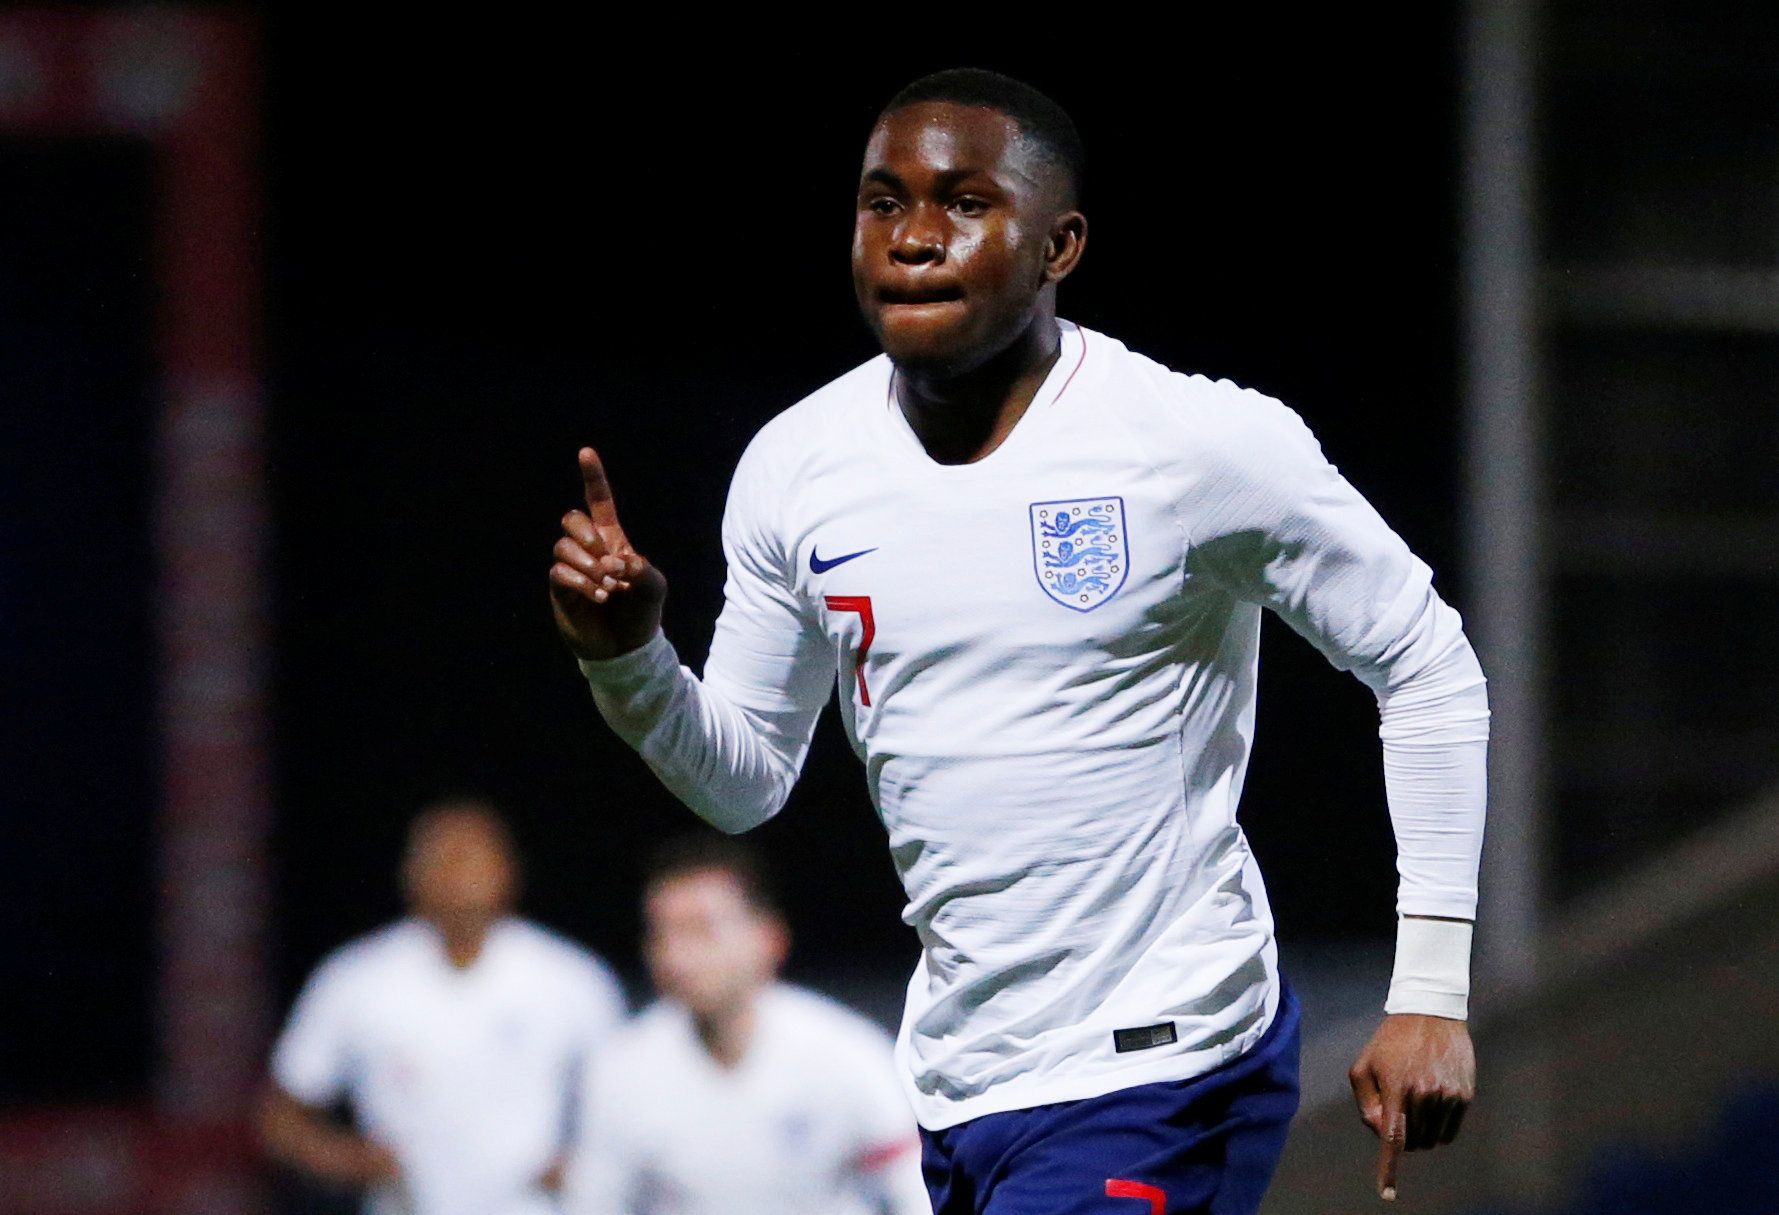 Soccer Football - European Under 21 Championship Qualifier - Group 4 - England v Andorra - Proact Stadium, Chesterfield, Britain - October 11, 2018  England's Ademola Lookman celebrates scoring their first goal   Action Images/Ed Sykes